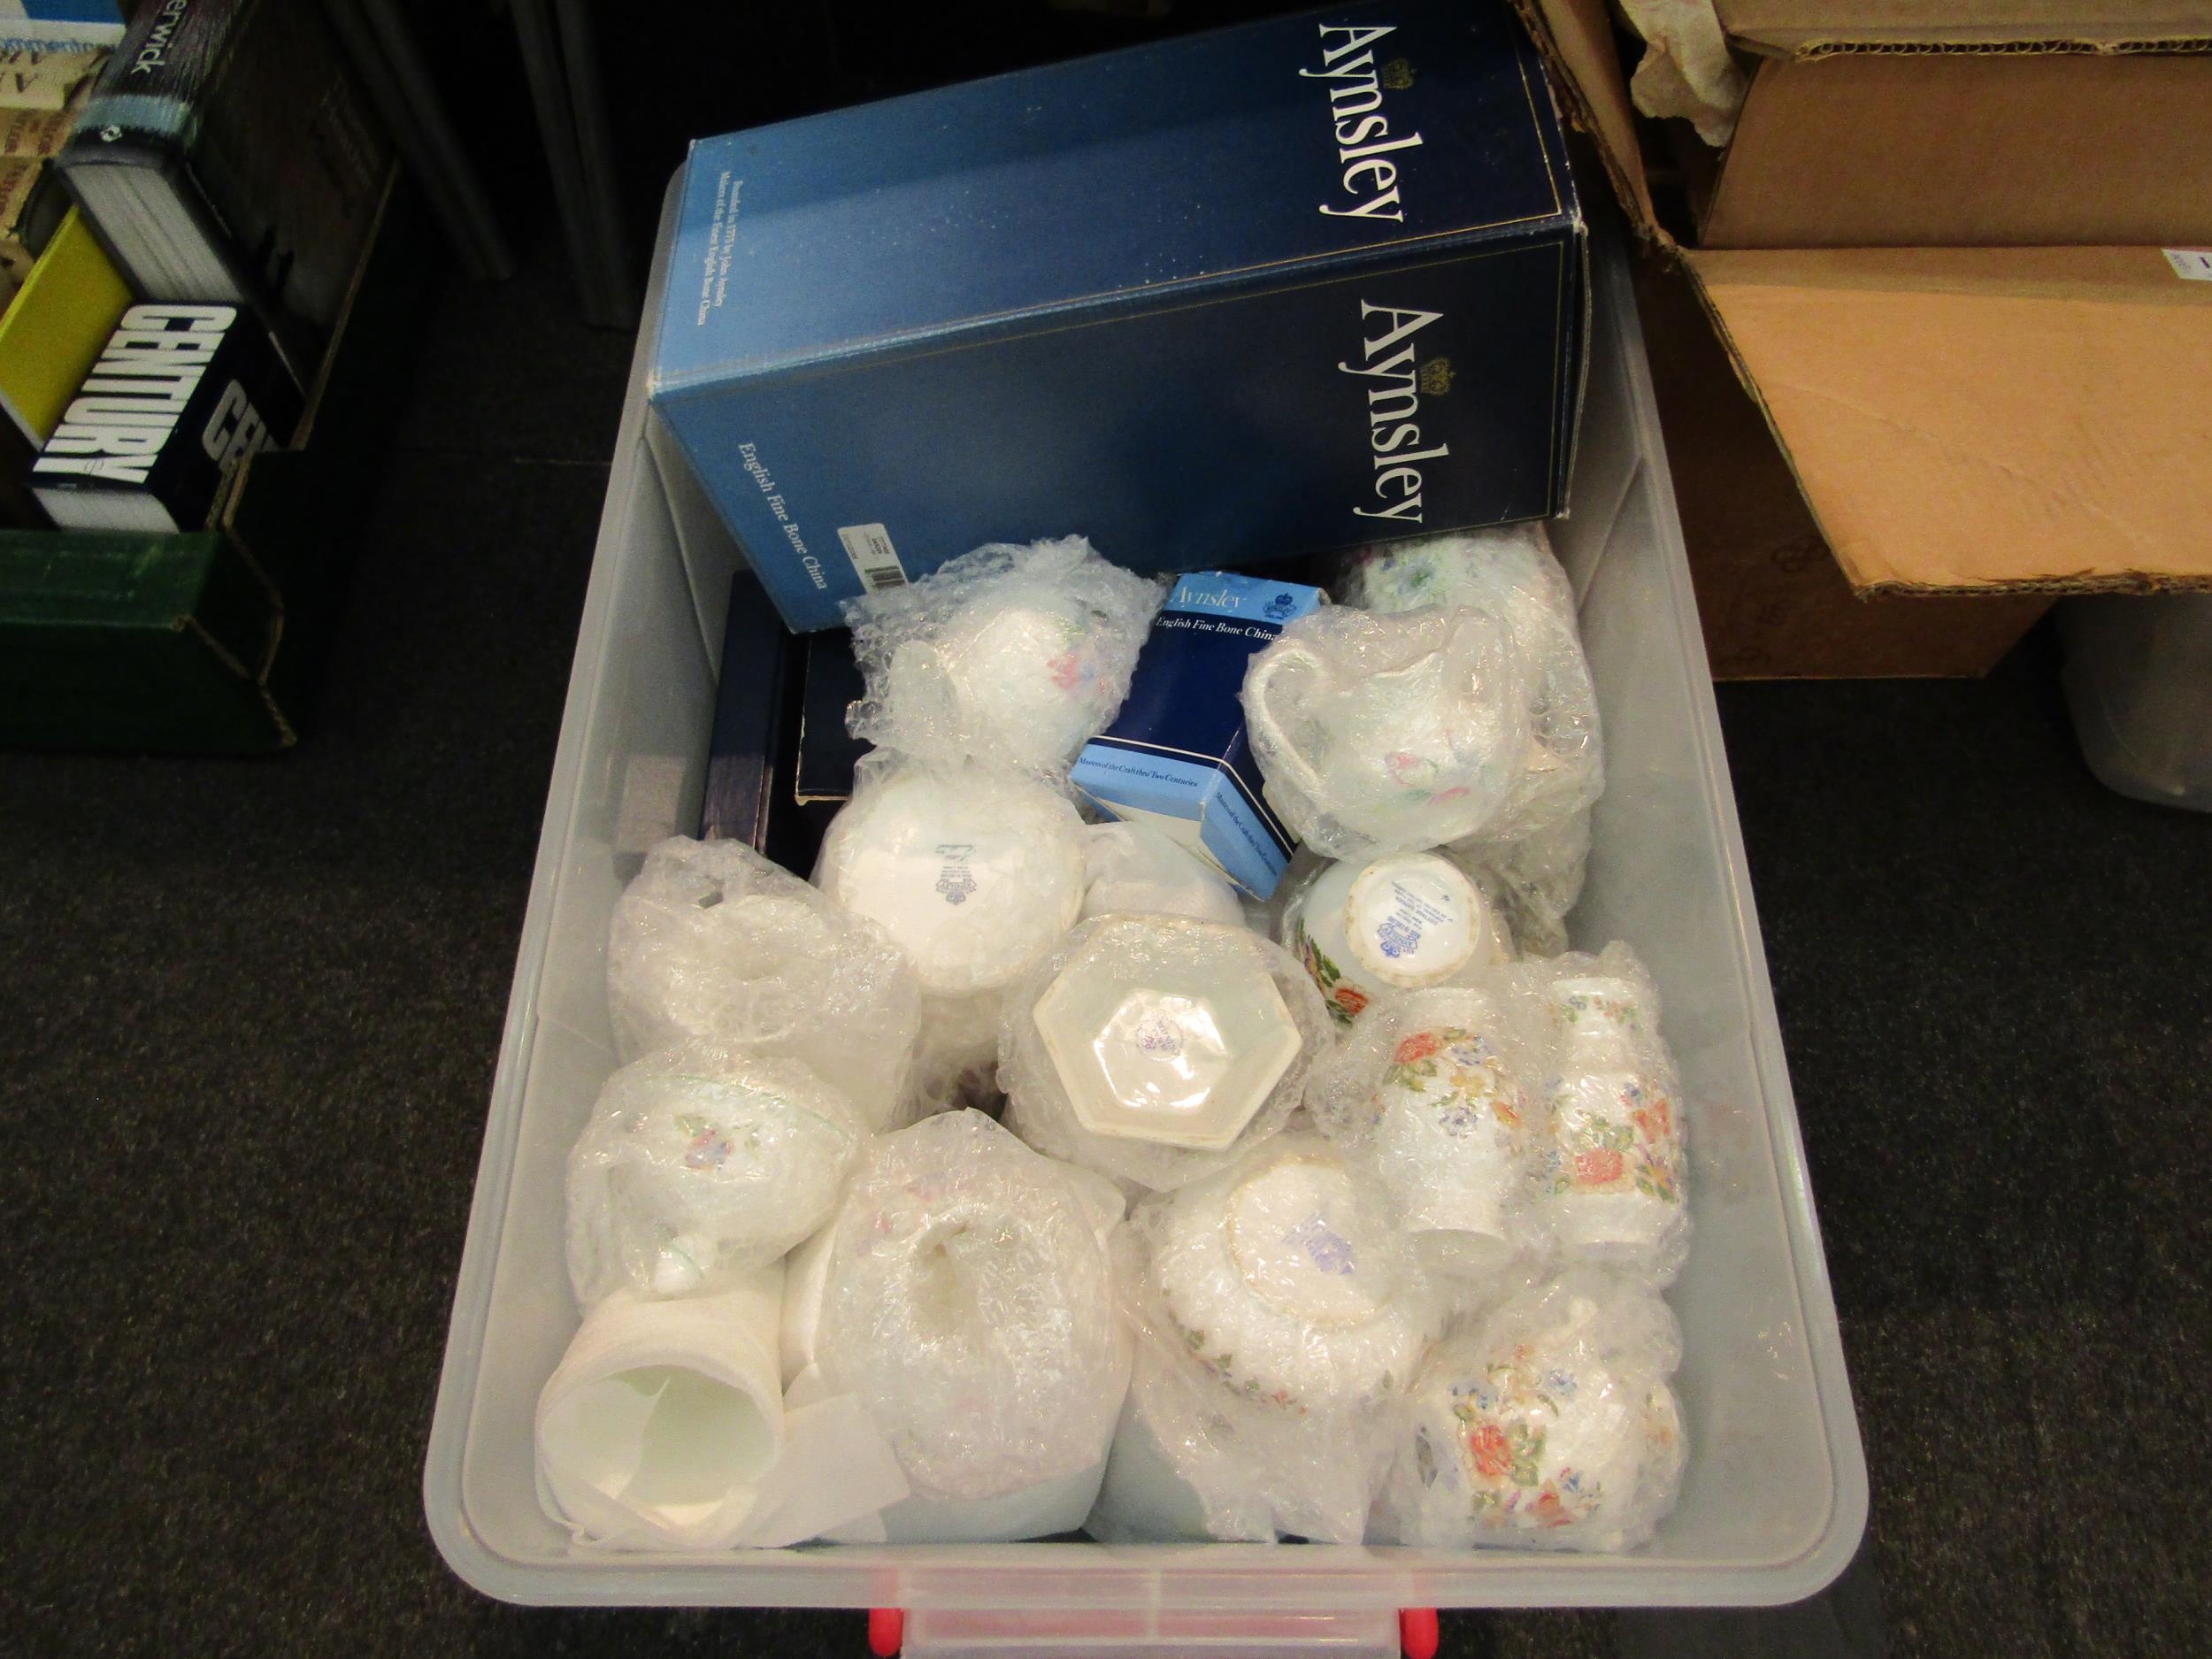 A box of Aynsley ceramics and a Royal Doulton "Juno" tea set for six, one cup missing